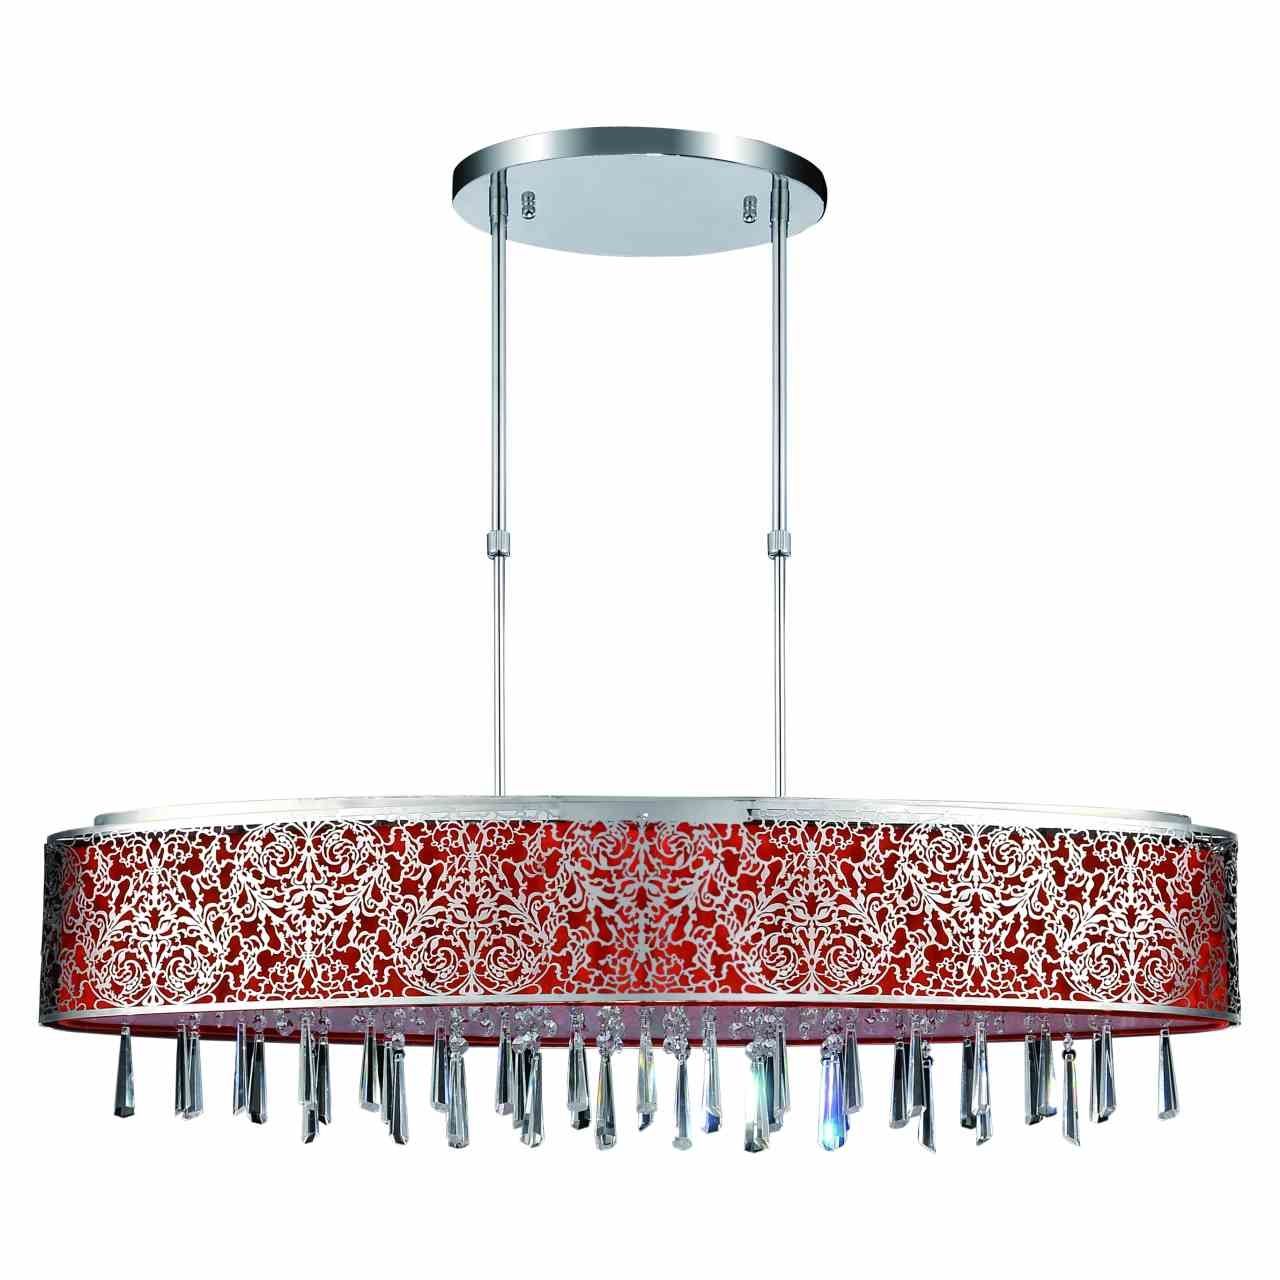 Brizzo Lighting Stores 38 Drago Modern Crystal Oval Linear Intended For Modern Red Chandelier (View 12 of 12)